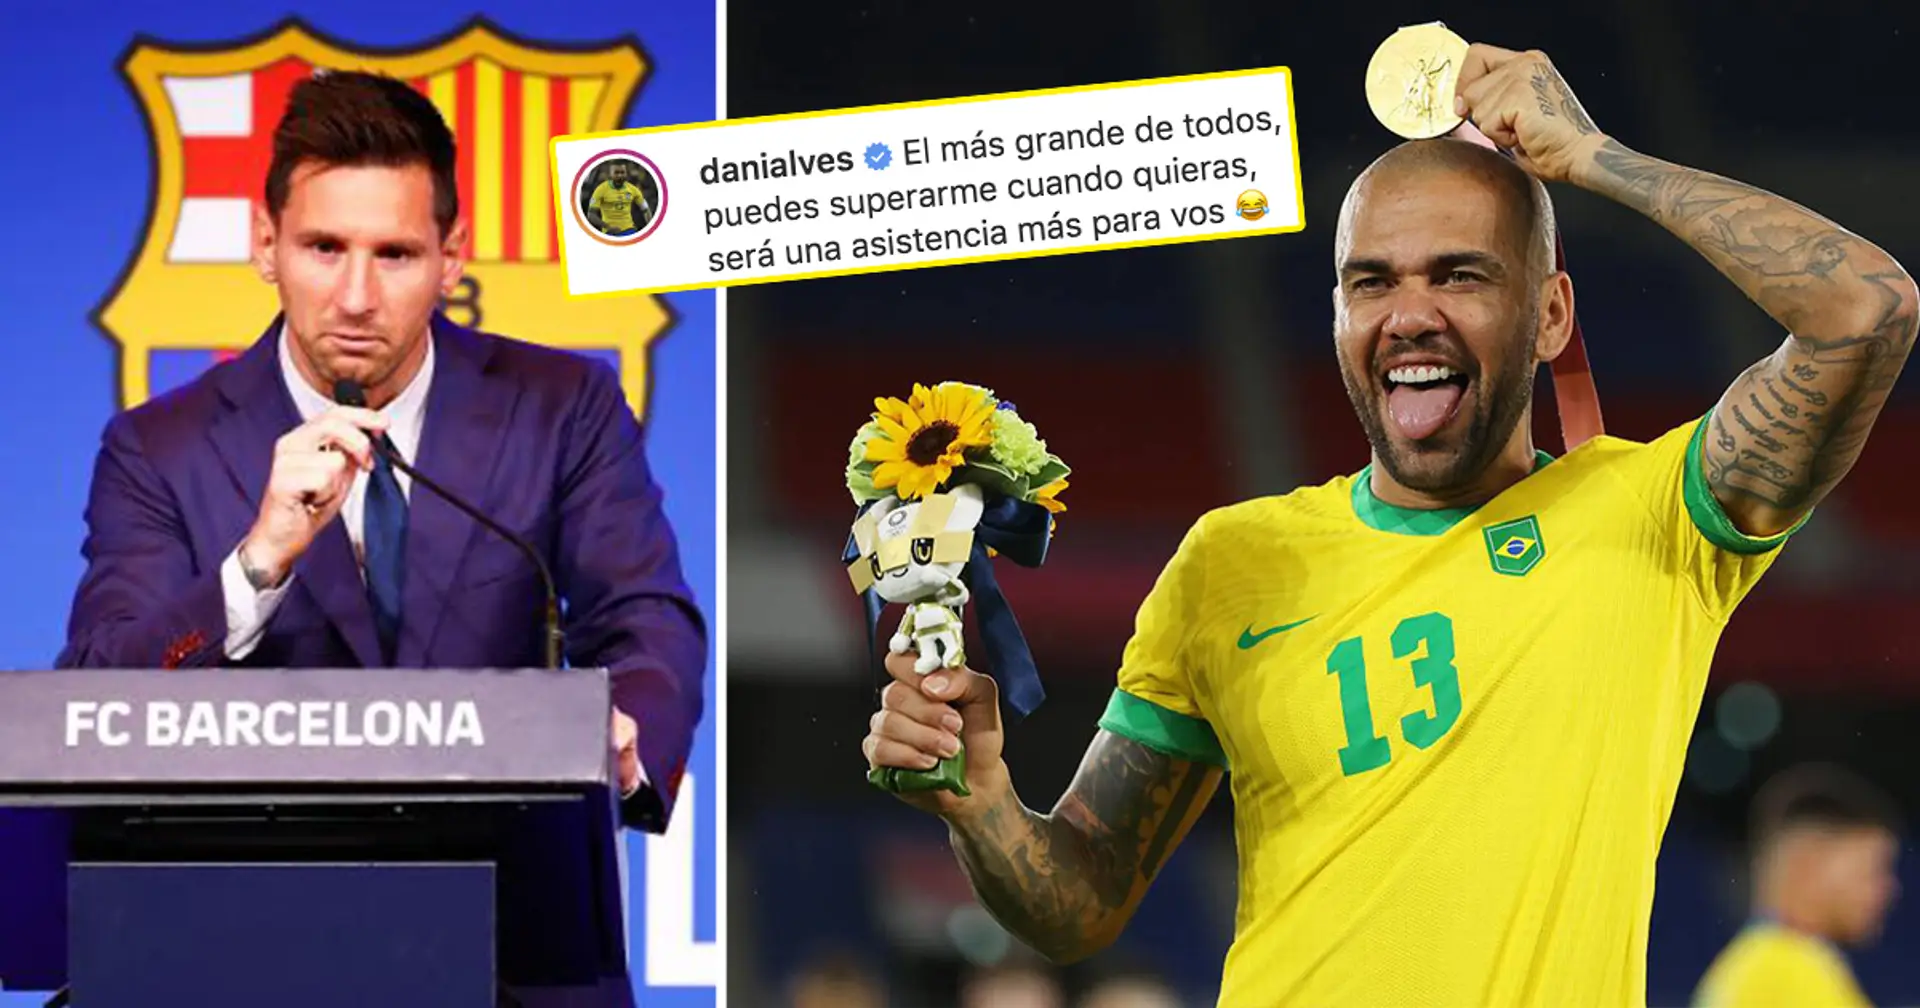 'After my girl, you're my best pair. Surpass me in trophies whenever you want': Dani Alves to Messi